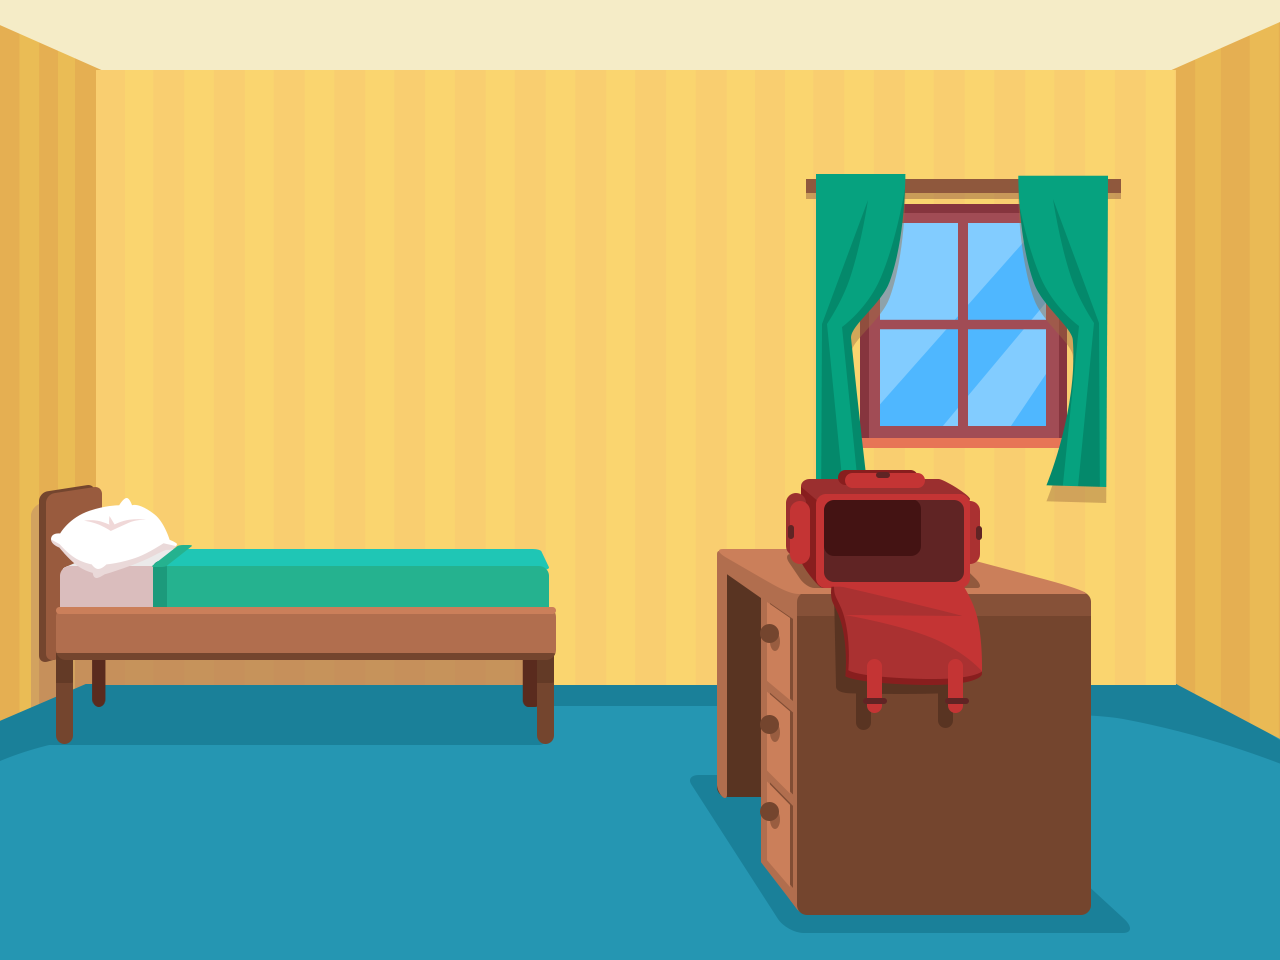 A bedroom with a bed in the top left corner, some empty space in front and under the bed, a desk with an open school bag on it to the right, a window behind the desk and some more empty space behind the desk in the top right corner of the room.